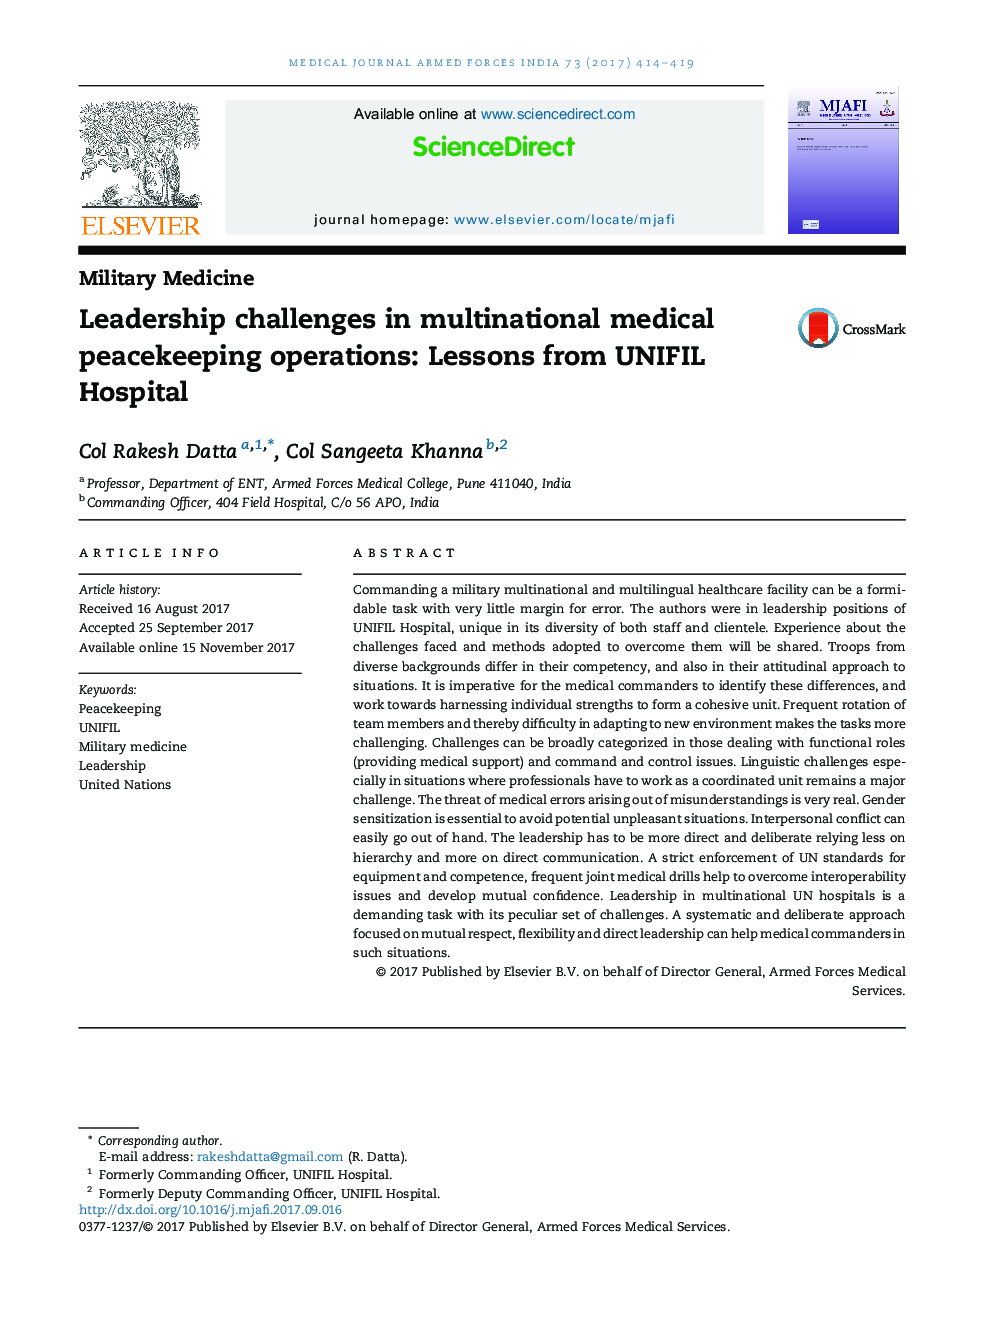 Leadership challenges in multinational medical peacekeeping operations: Lessons from UNIFIL Hospital